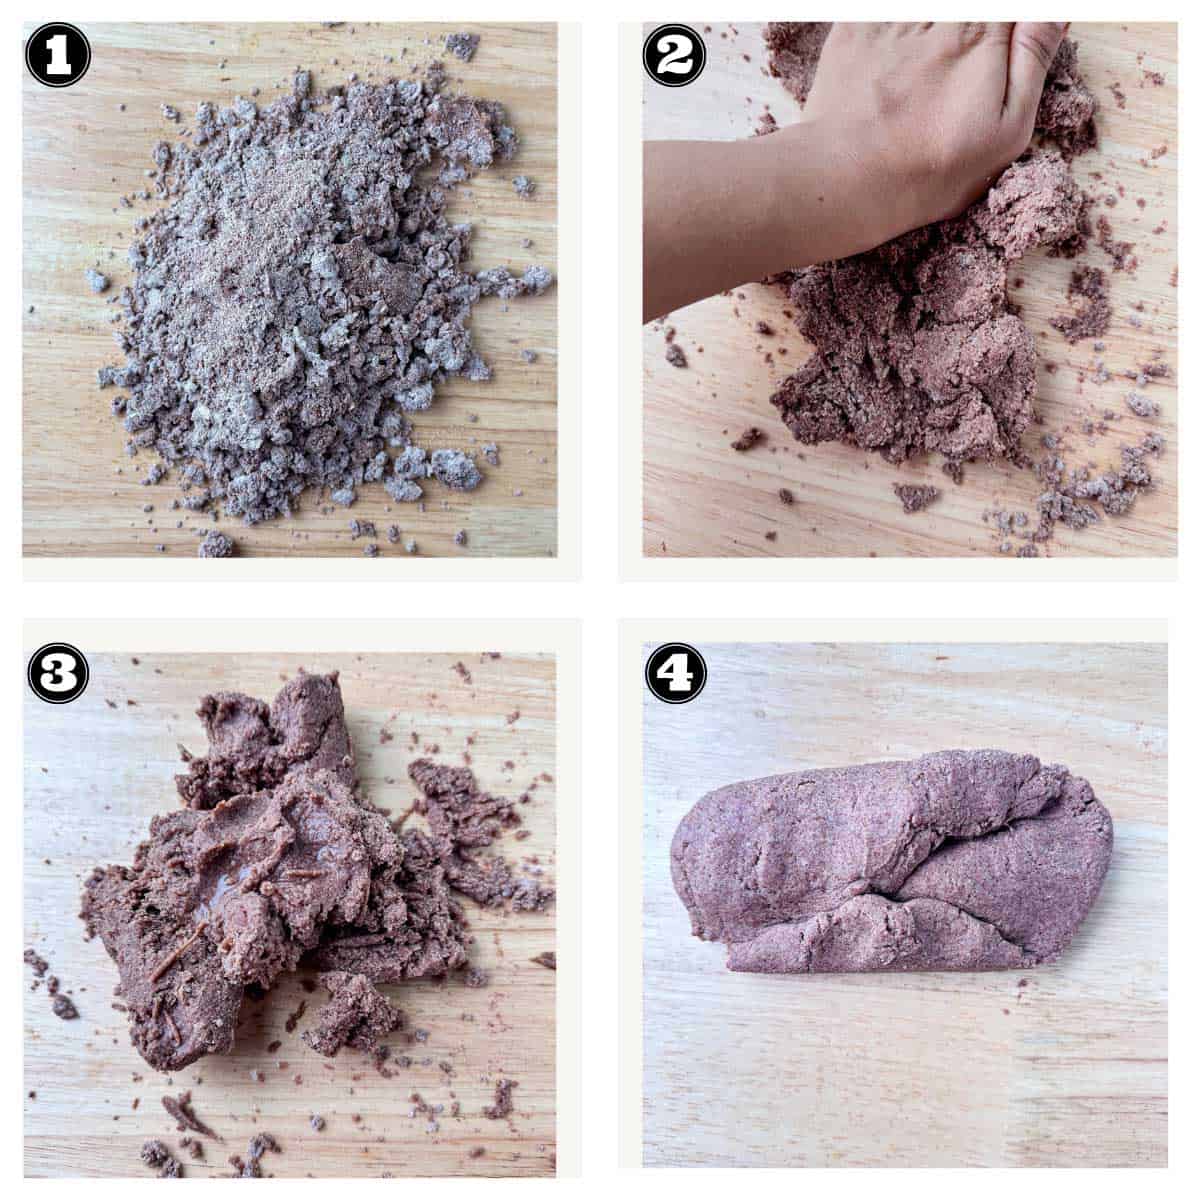 images showing the process of kneading the ragi dough